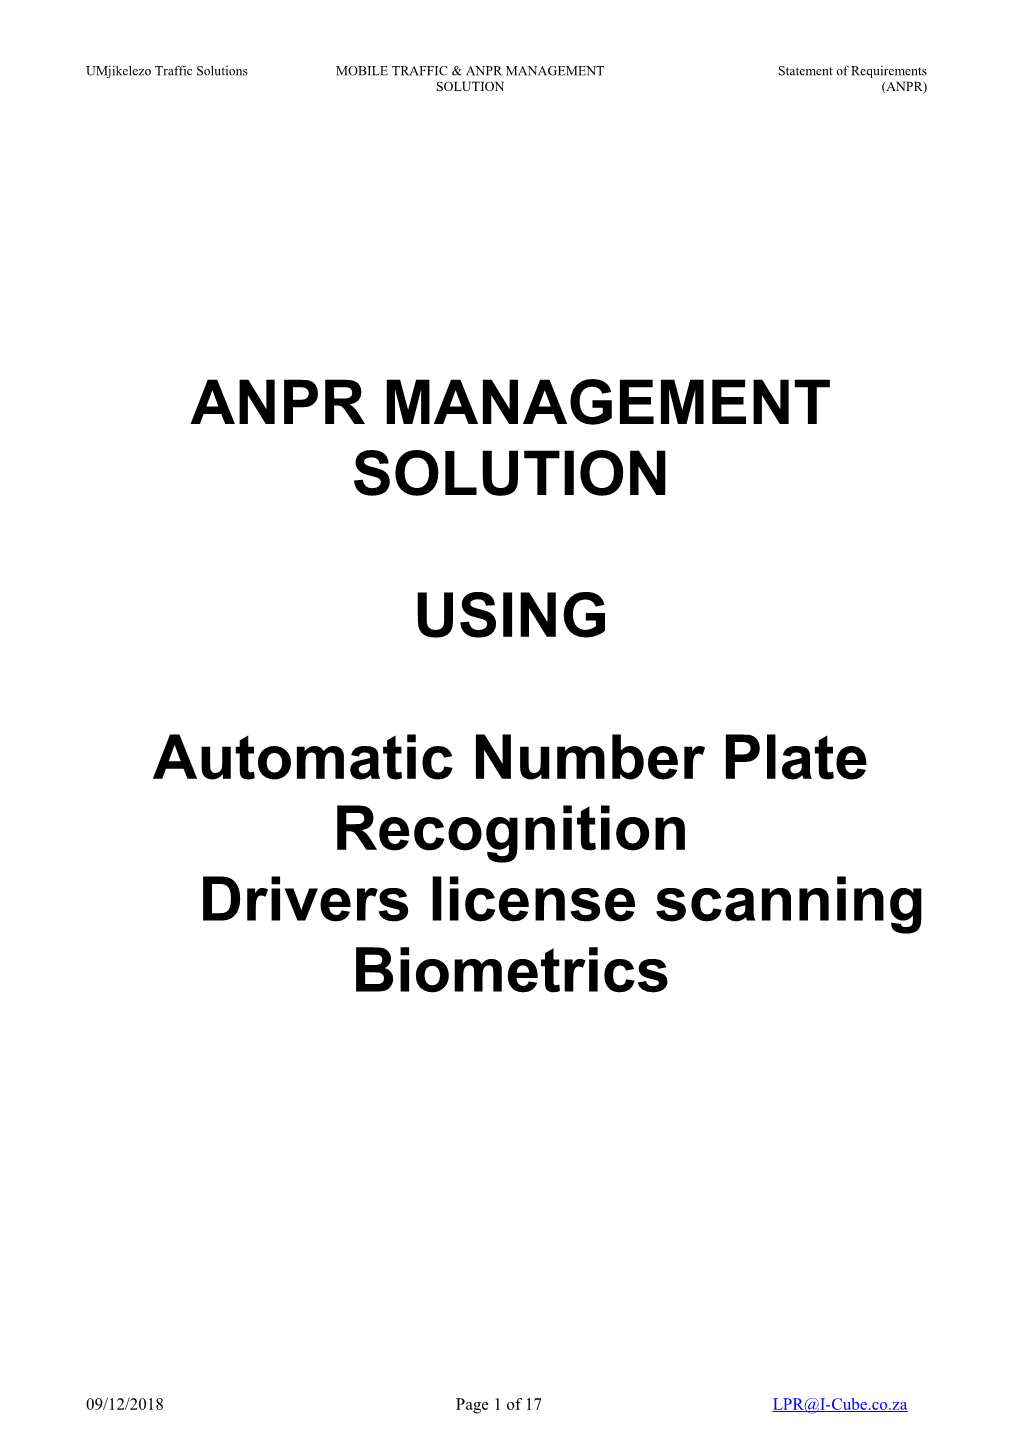 Statement of Requirements (Anpr)